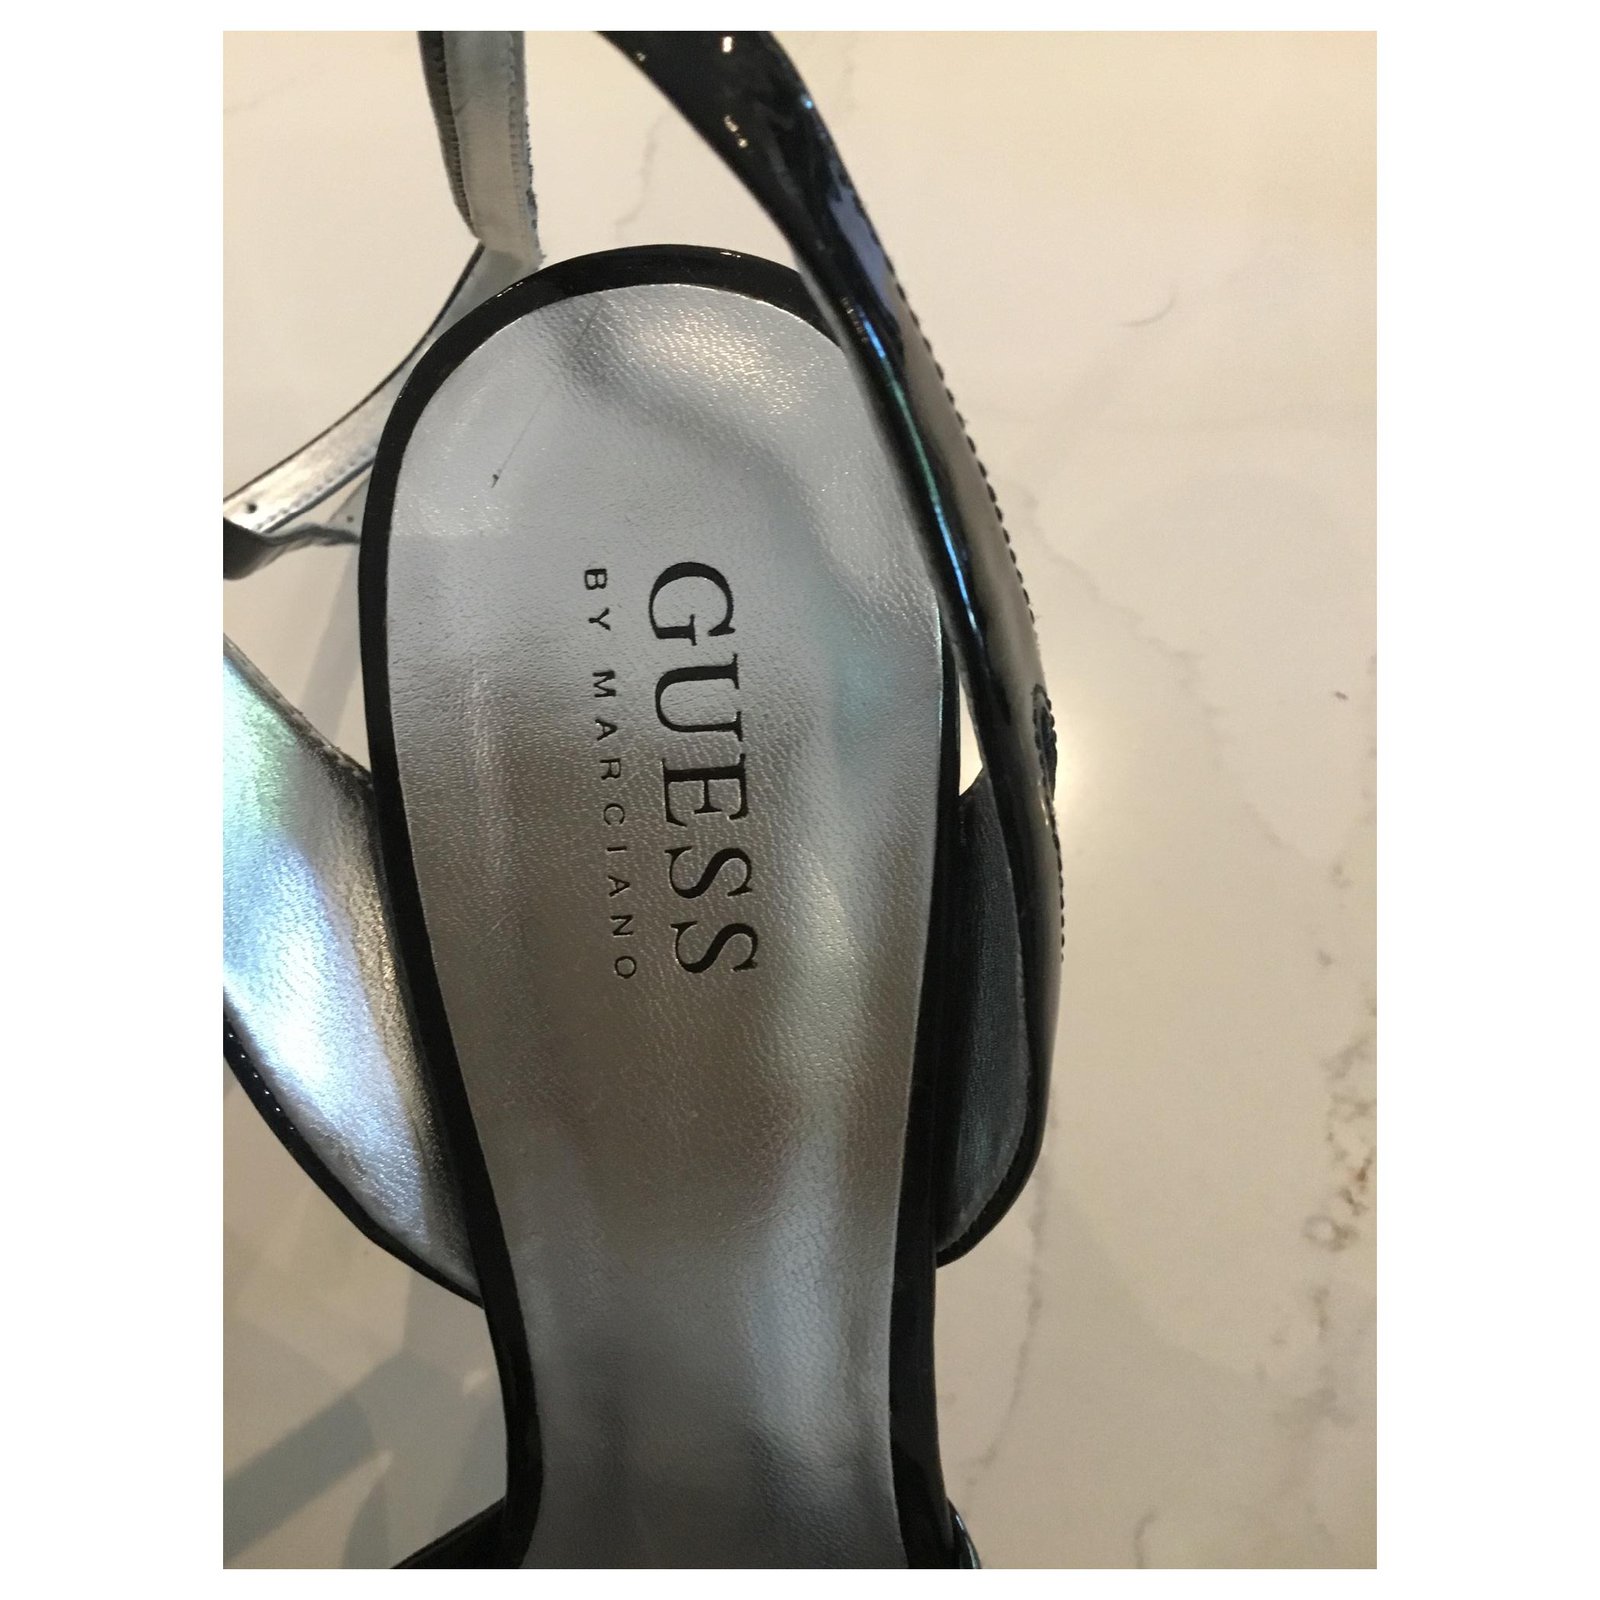 Best 7 New Marciano By Guess Platform Heels Genuine Leather for sale in  Calgary, Alberta for 2024